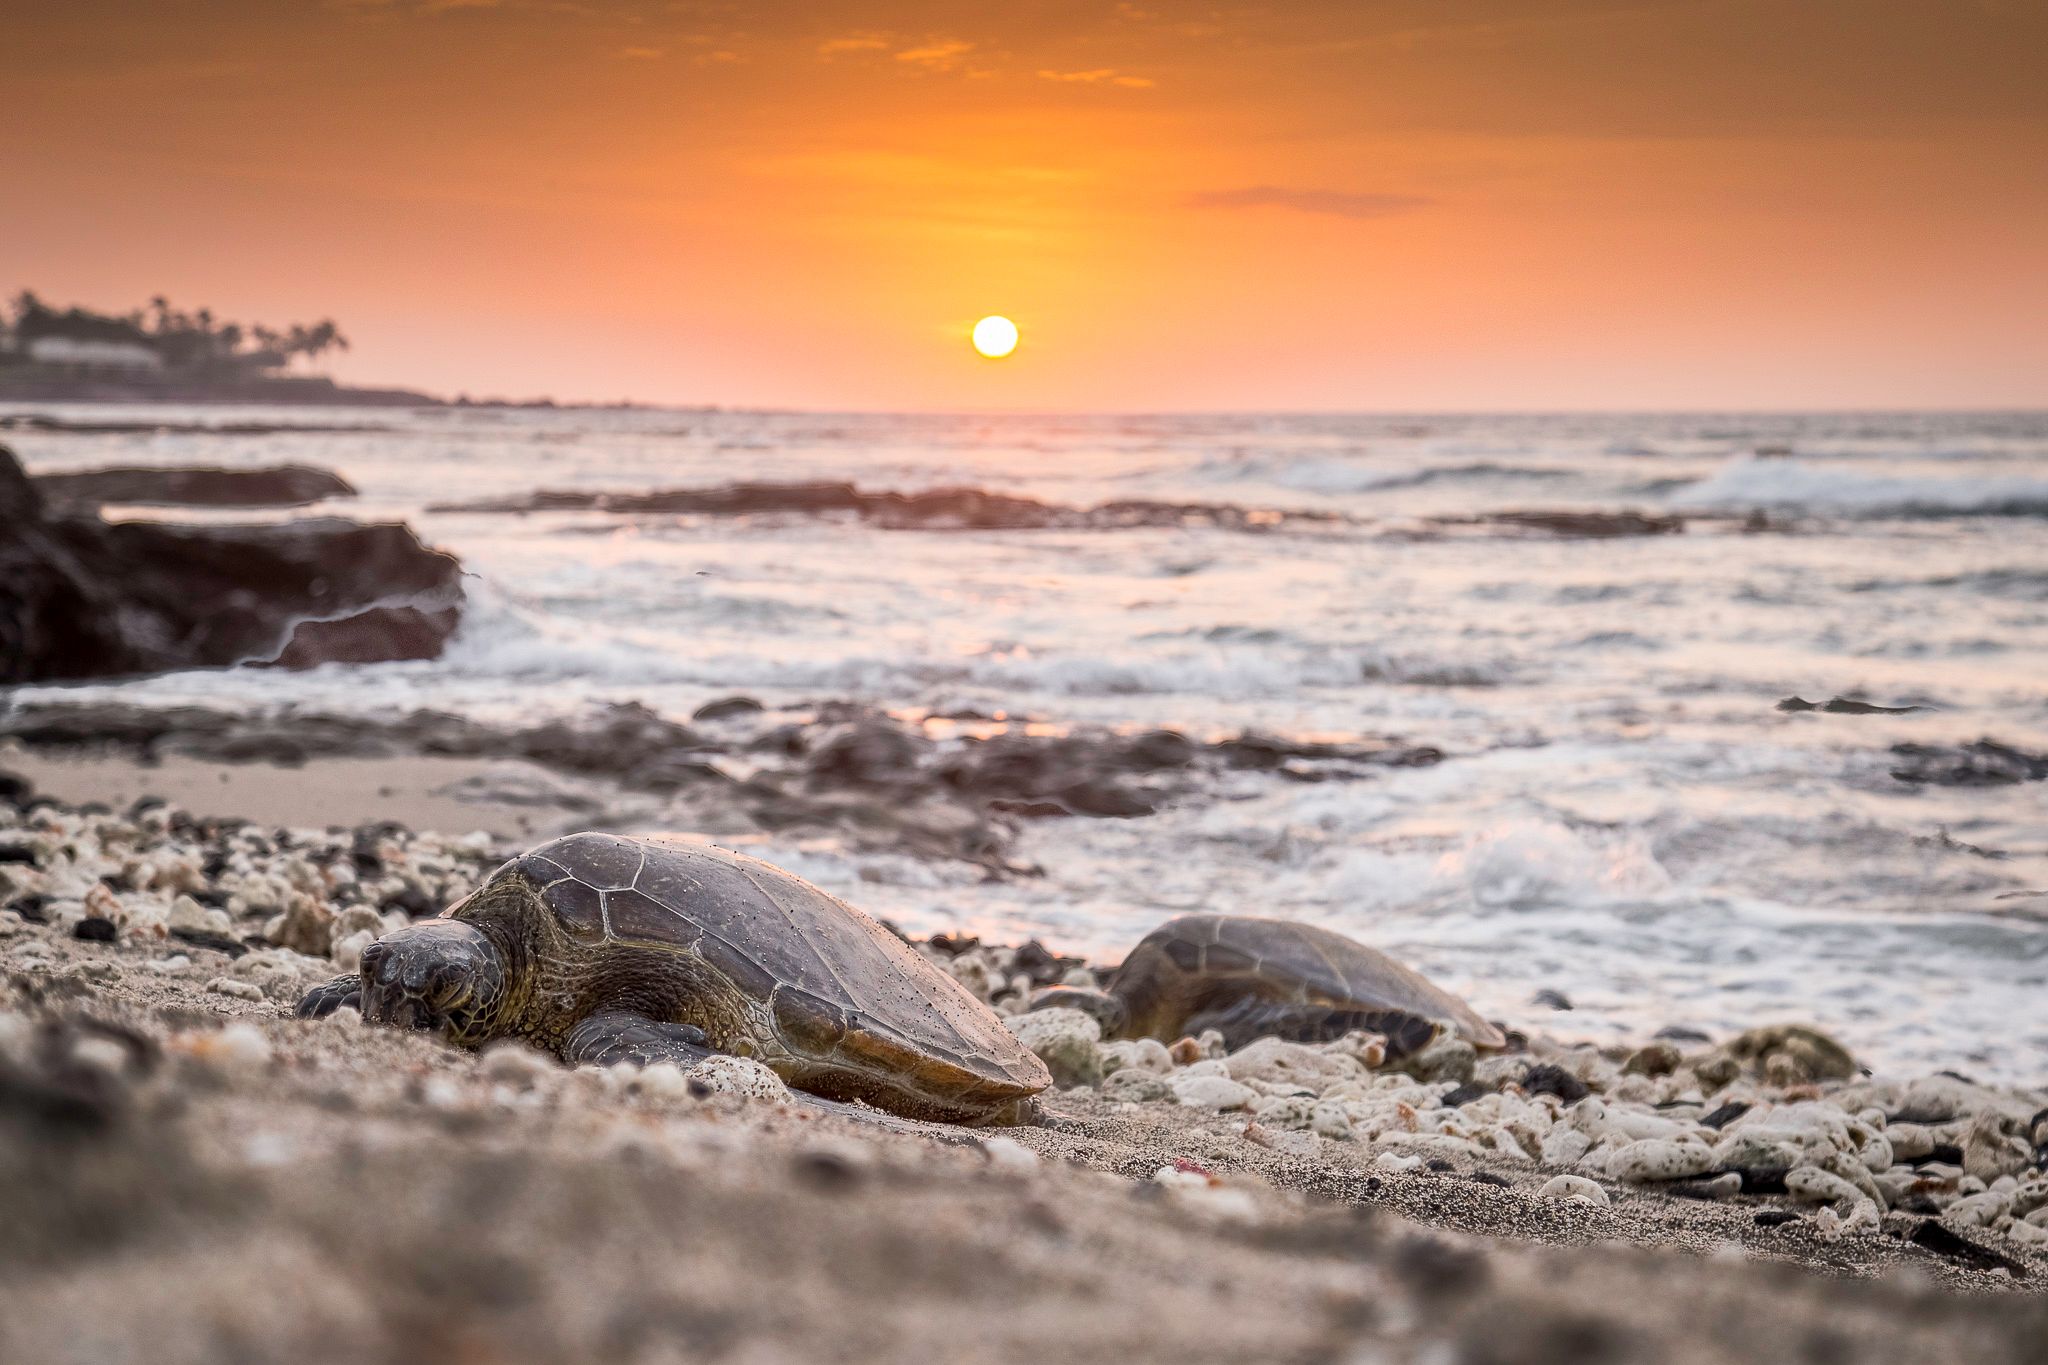 Two turtles on sand with sunset in background